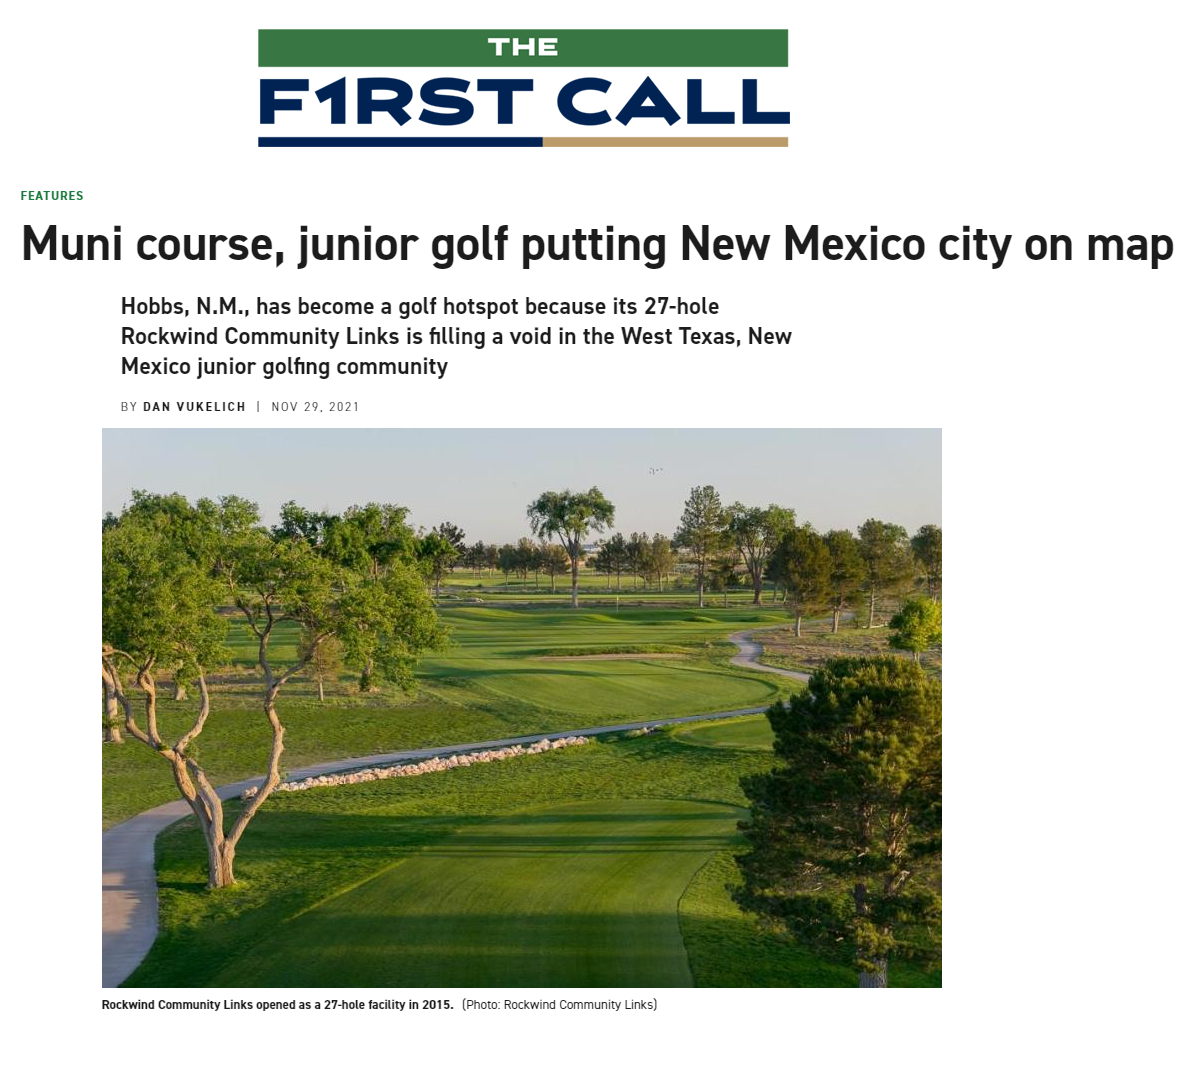 Muni Course, junior golf putting New Mexico city on the map